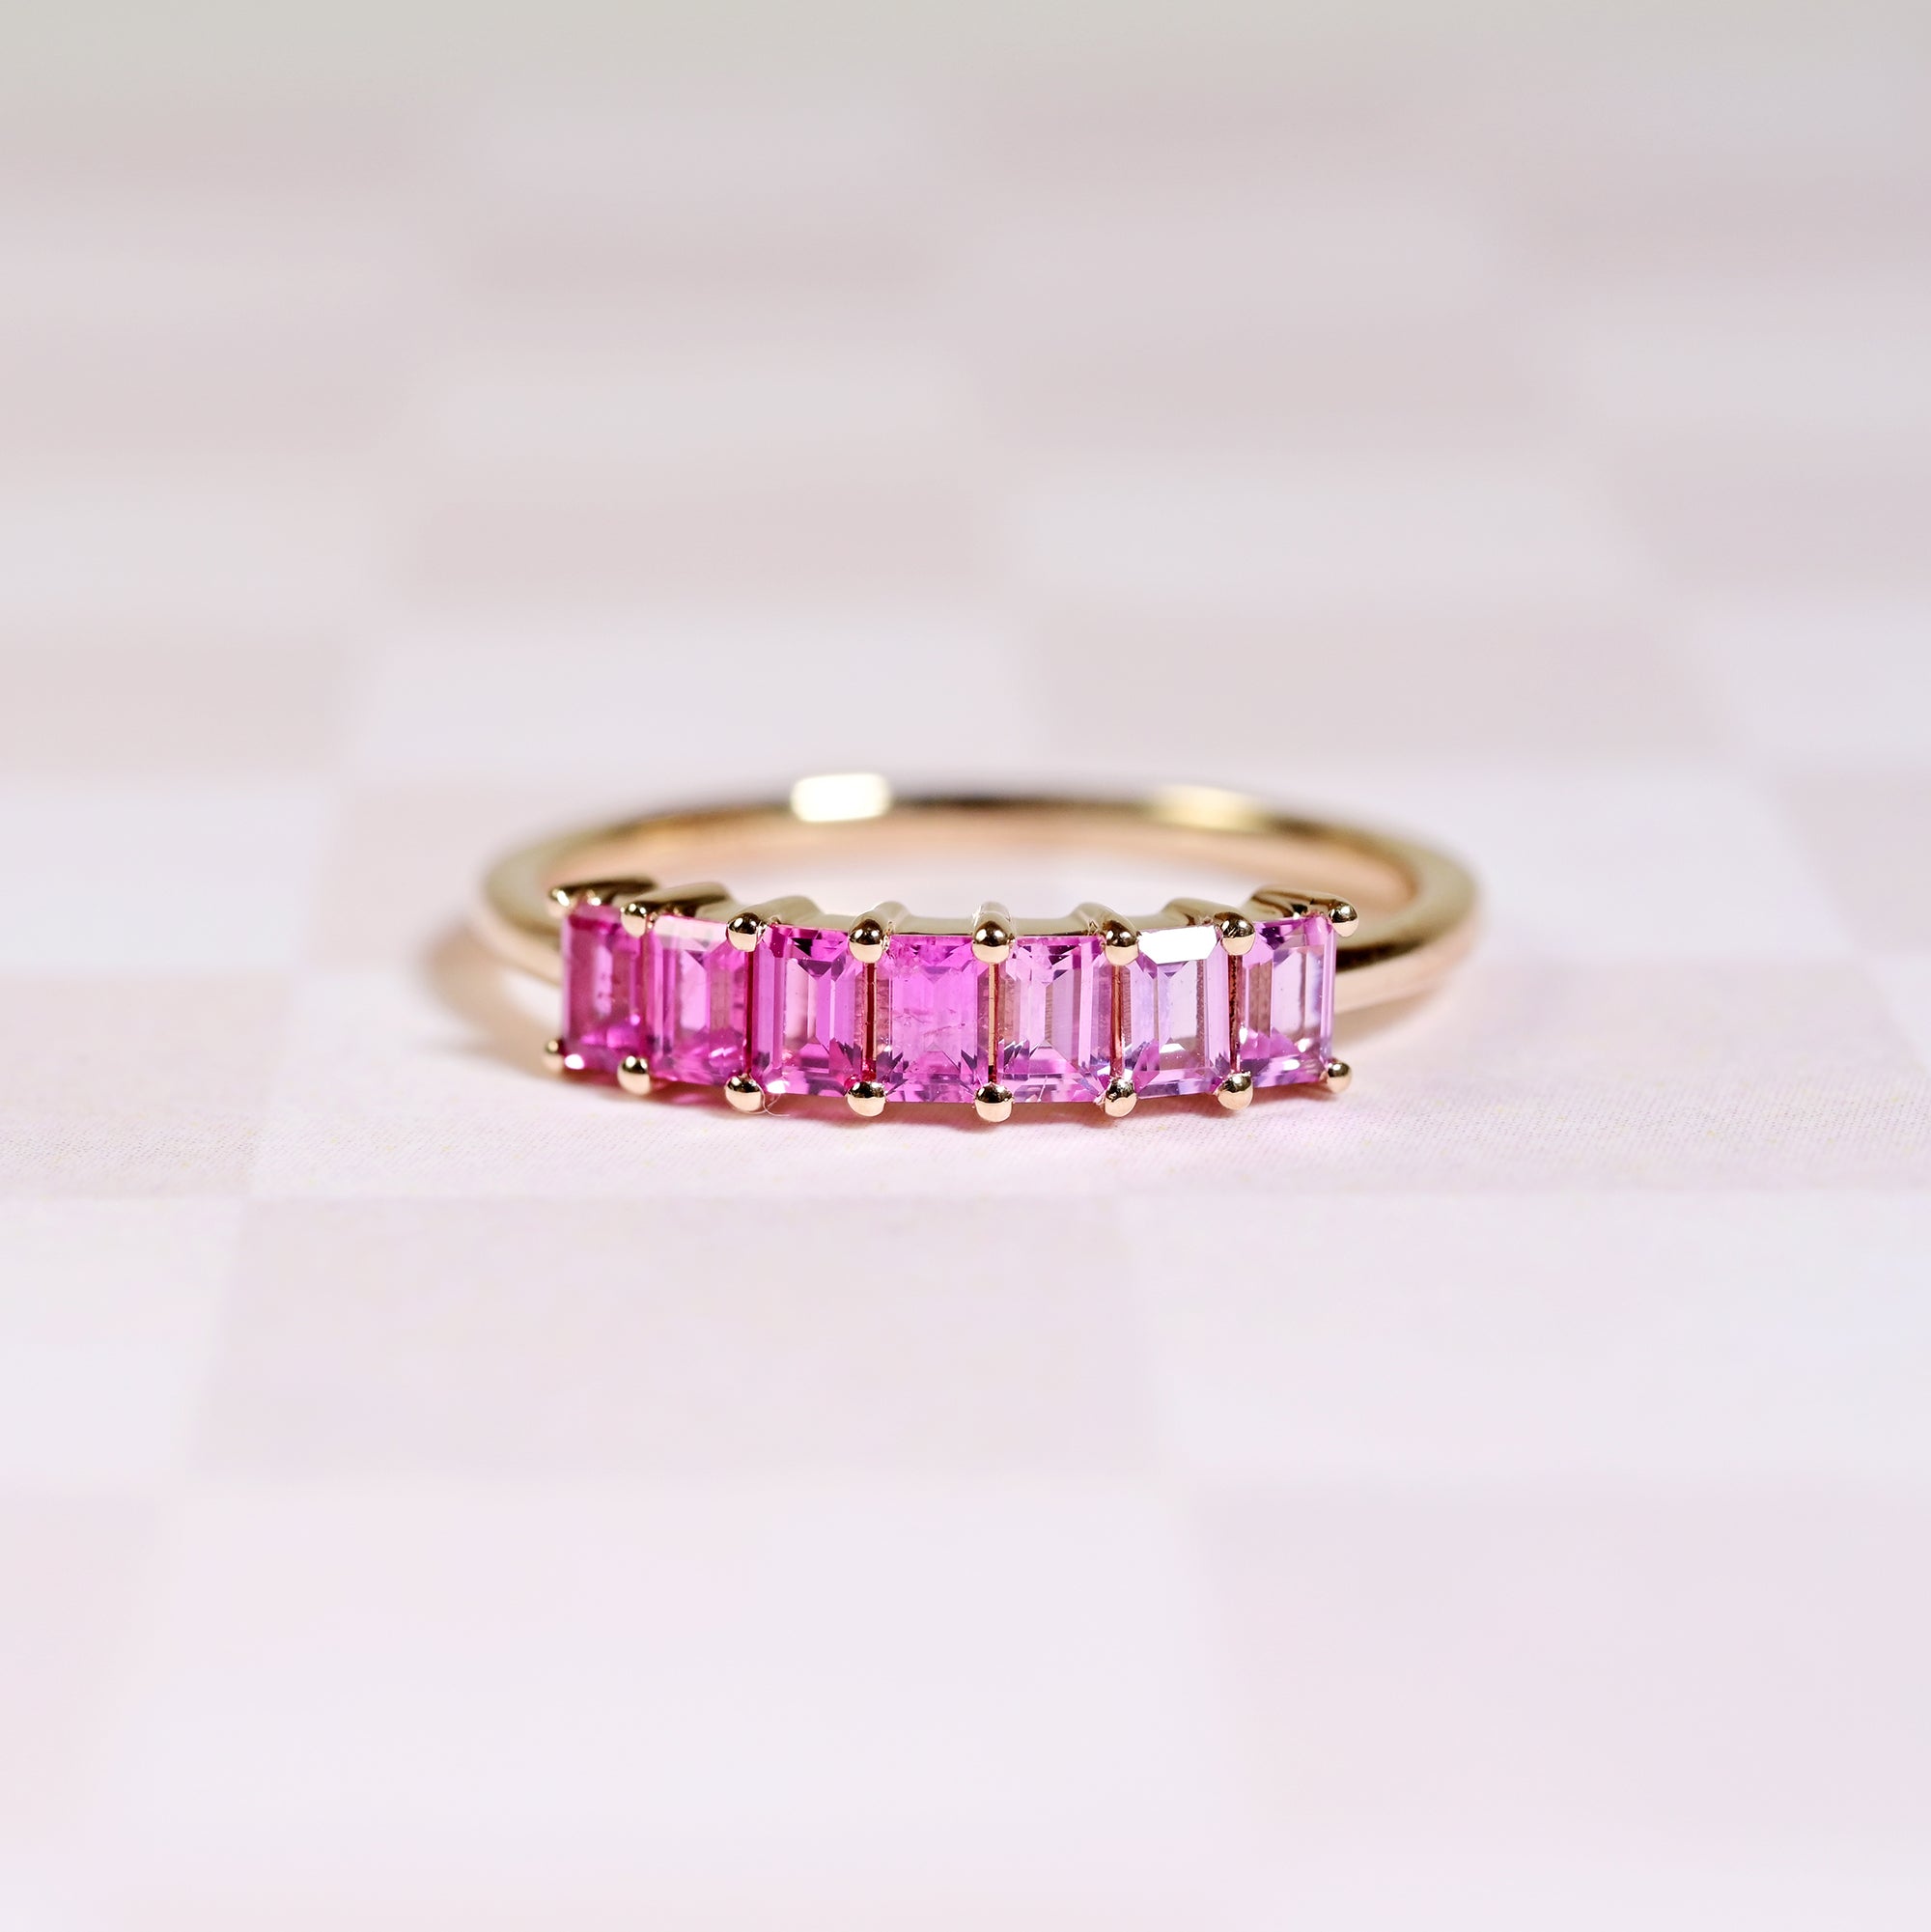 Cute pink sapphire ring with gradient ombre colors